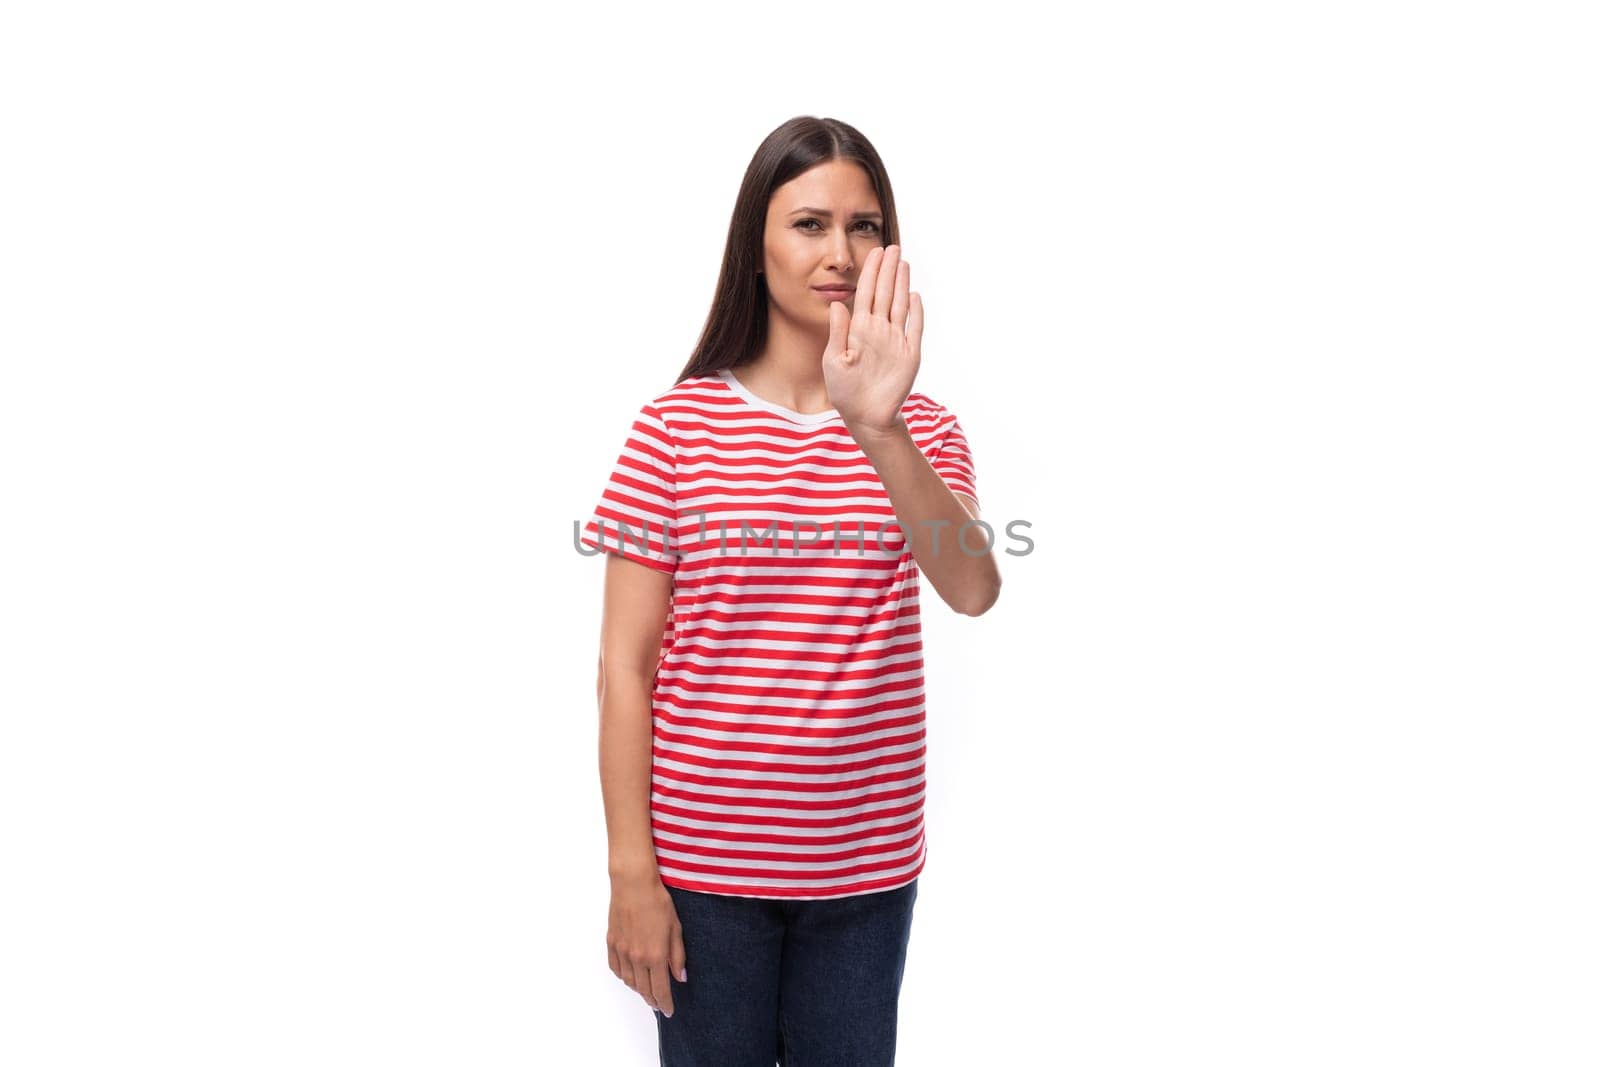 35 year old european lady in a red striped t-shirt shows a gesture of refusal and disagreement.